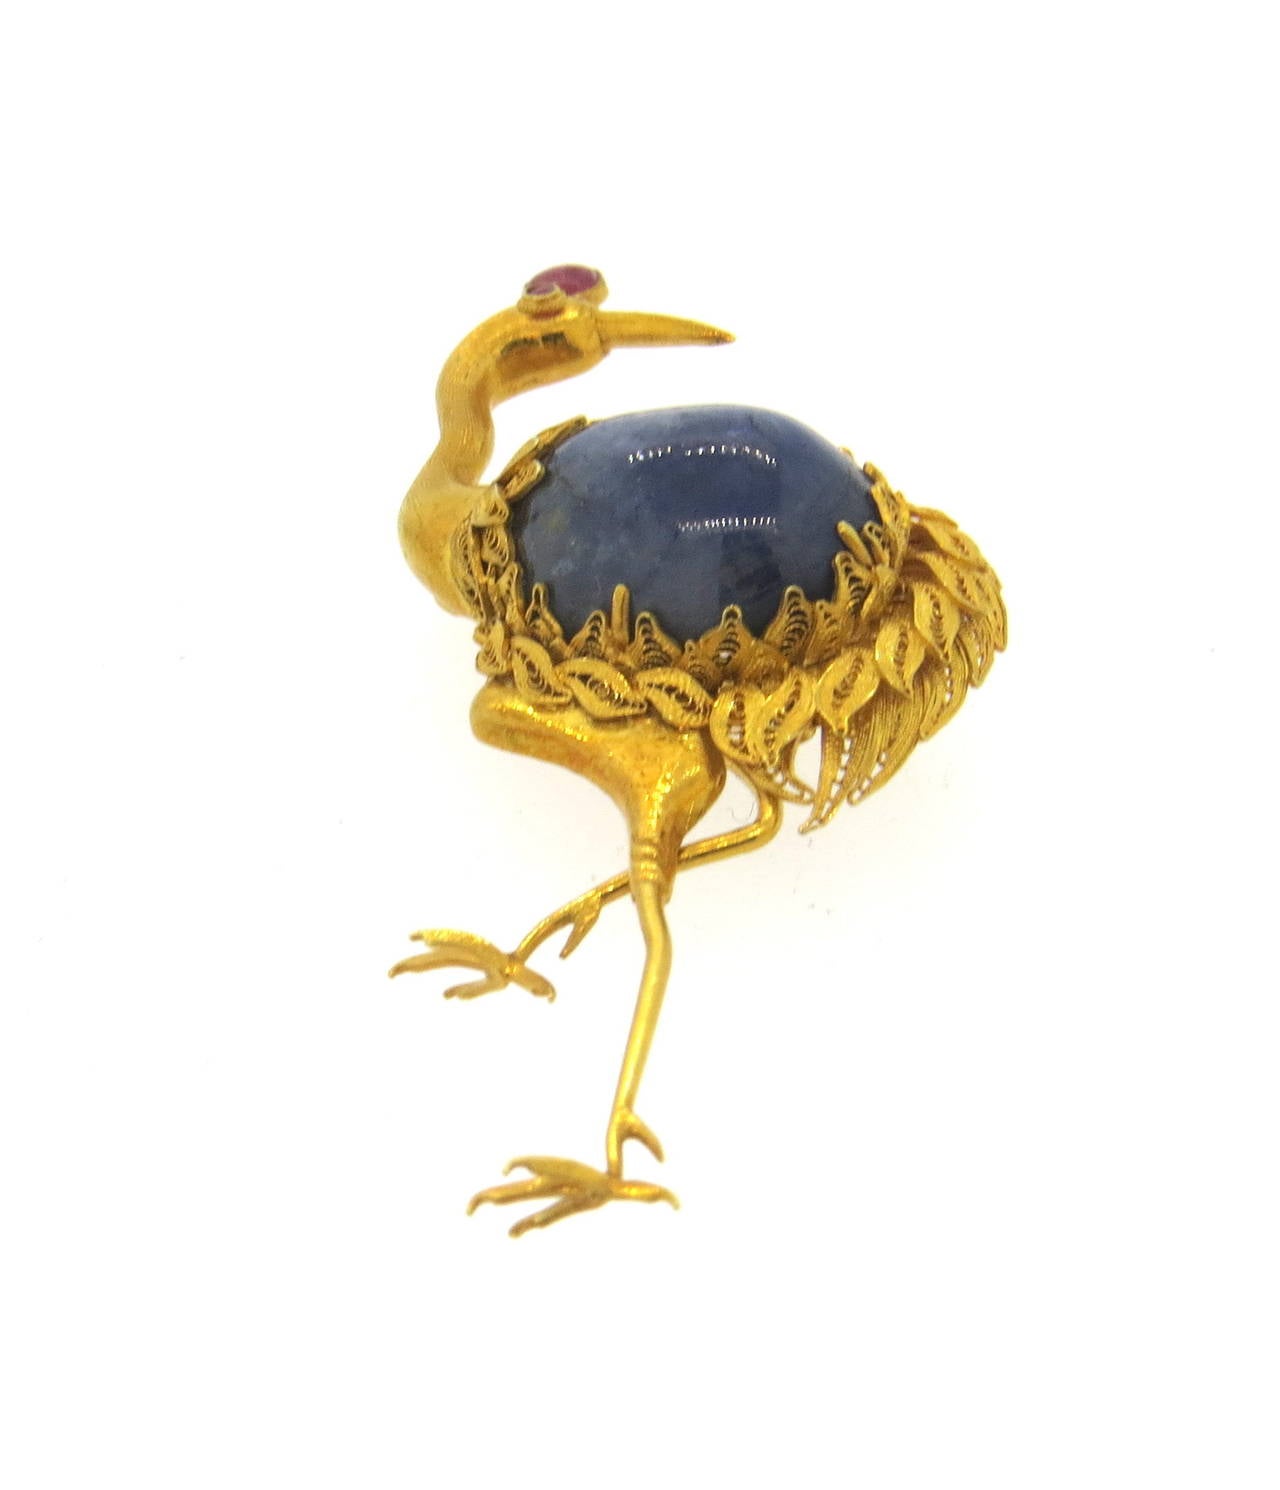 14k gold brooch pin, depicting crane, set with 19.3mm x 14mm sapphire cabochon, weighting approx. 20ct and ruby. Brooch measures 65mm x 35mm. Weight of the piece - 14.6 grams